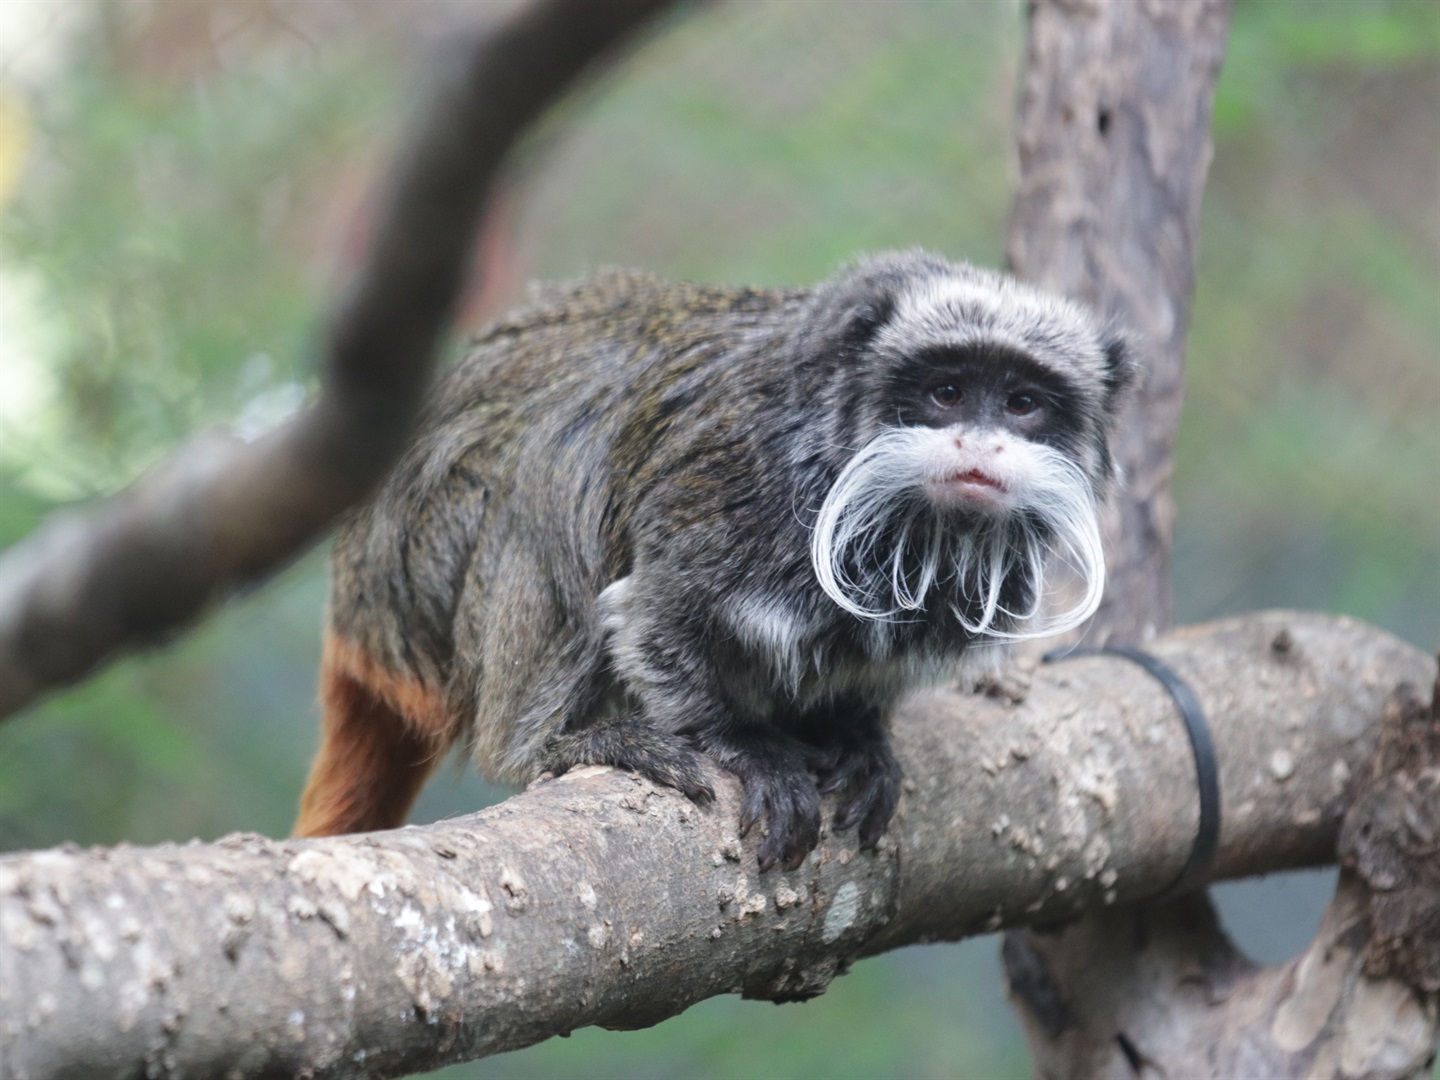 Businessinsider.co.za | Mystery at the Dallas Zoo: 2 monkeys are missing, following a leopard escape and a dead vulture